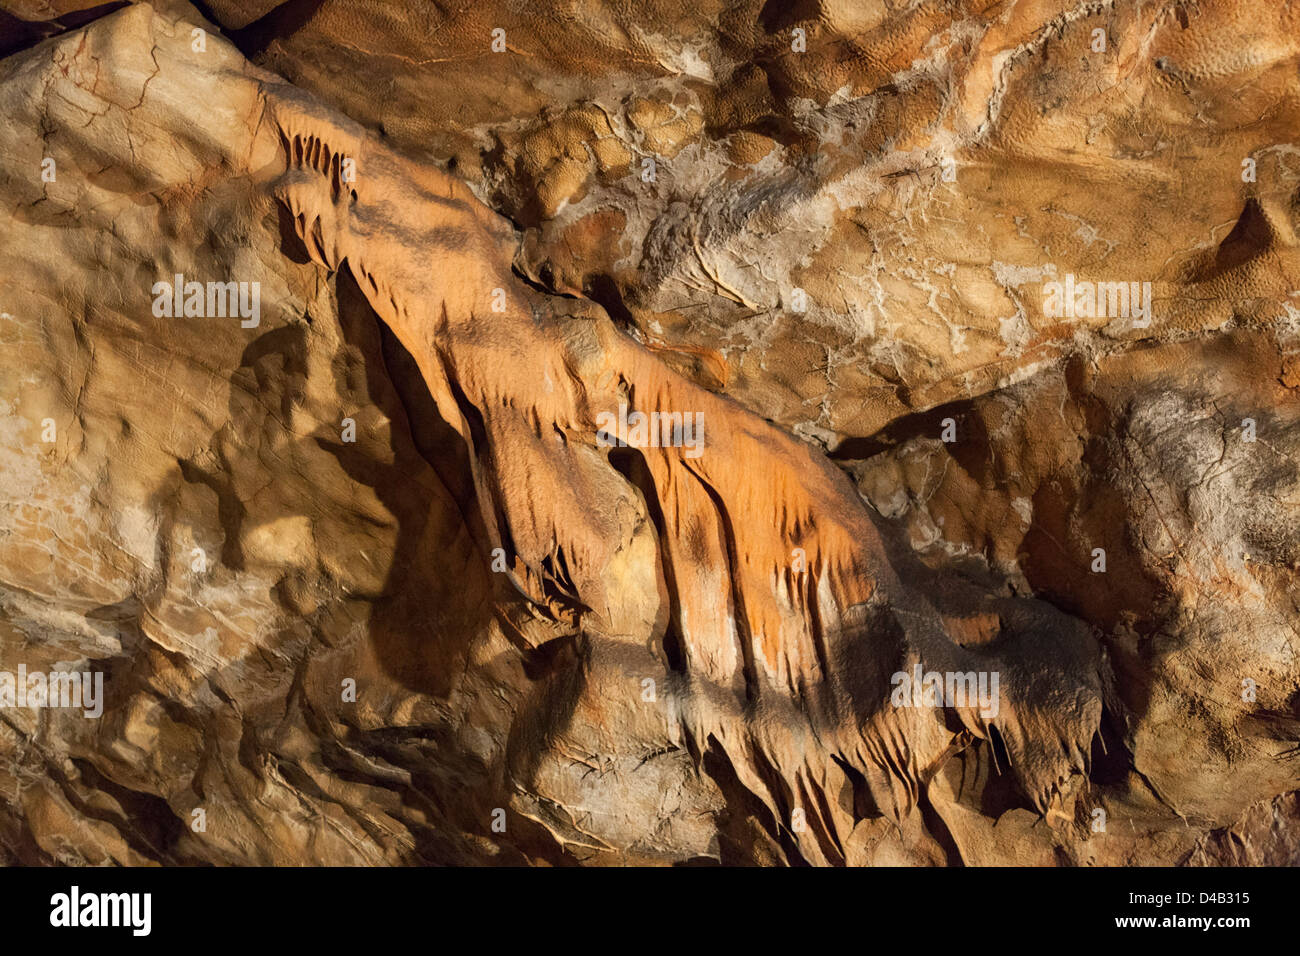 National Park Aggtelek Caves in Hungary, also called Baradla-Aggtelek Caves, shape of a wolf Stock Photo